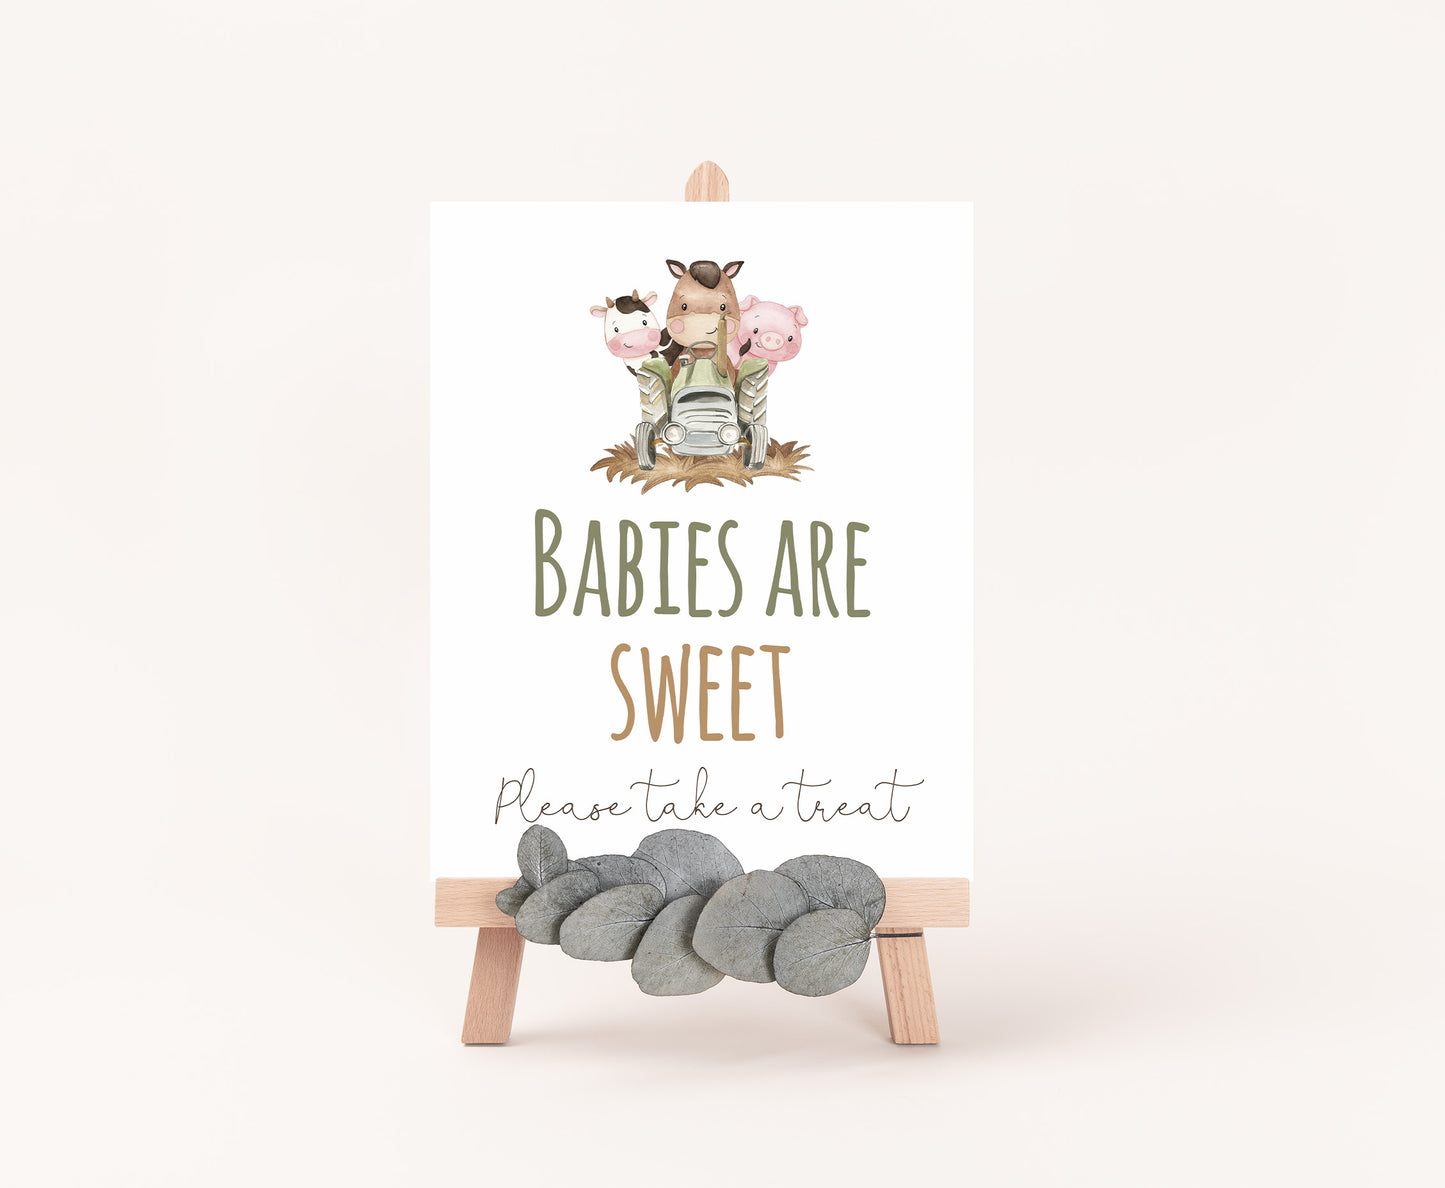 Babies are Sweet Sign Printable | Farm Party Table Decoration - 11E